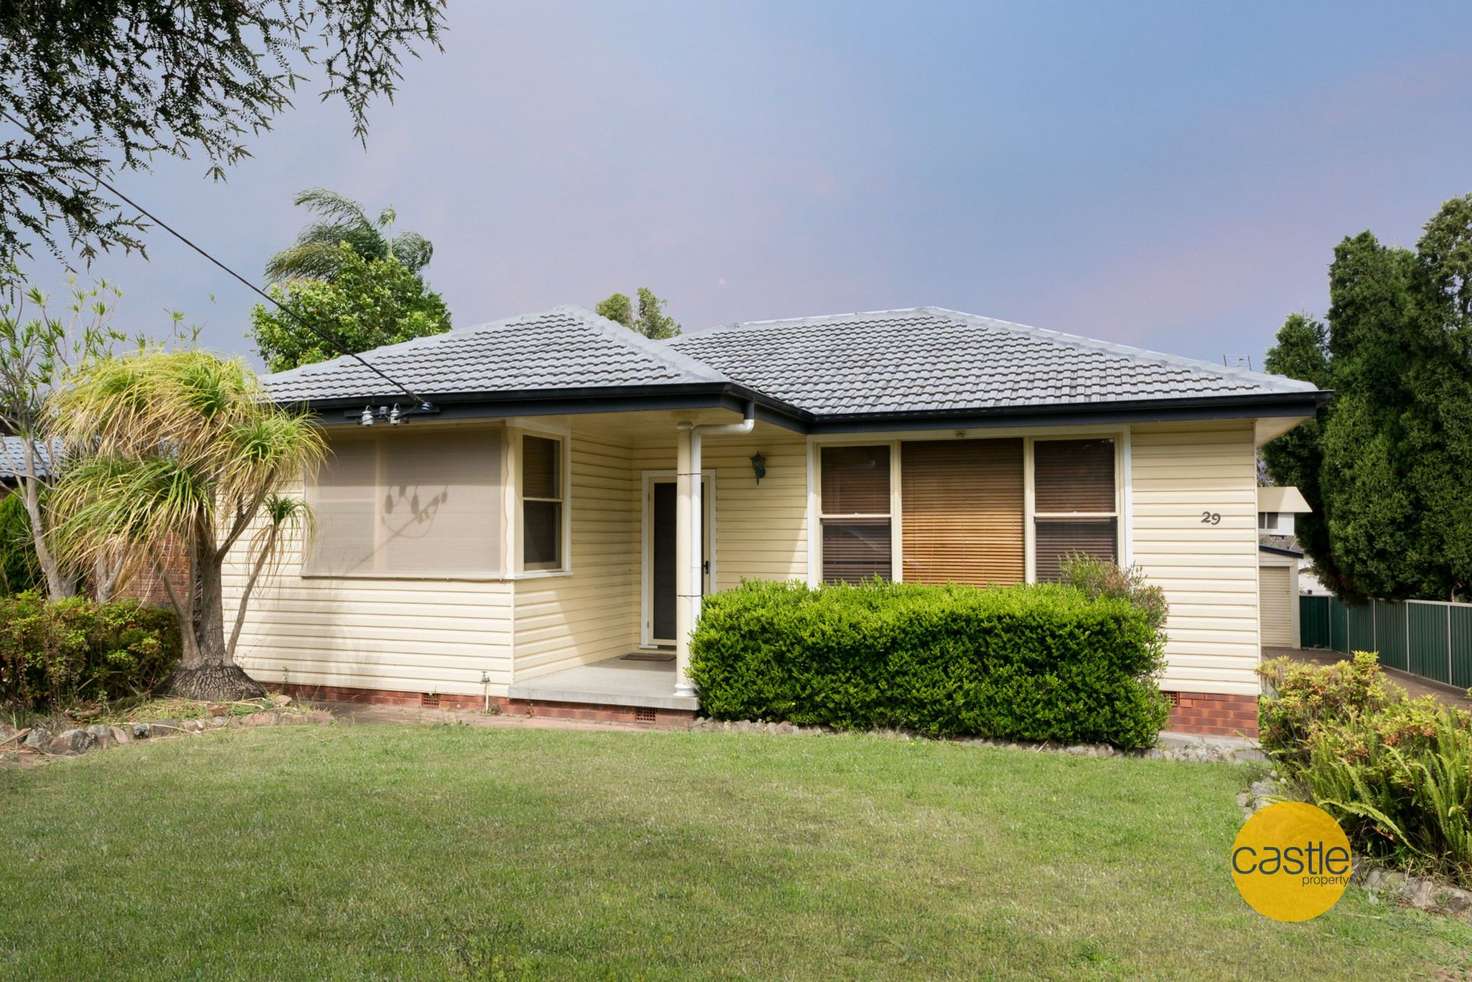 Main view of Homely house listing, 29 Clarence St, Glendale NSW 2285